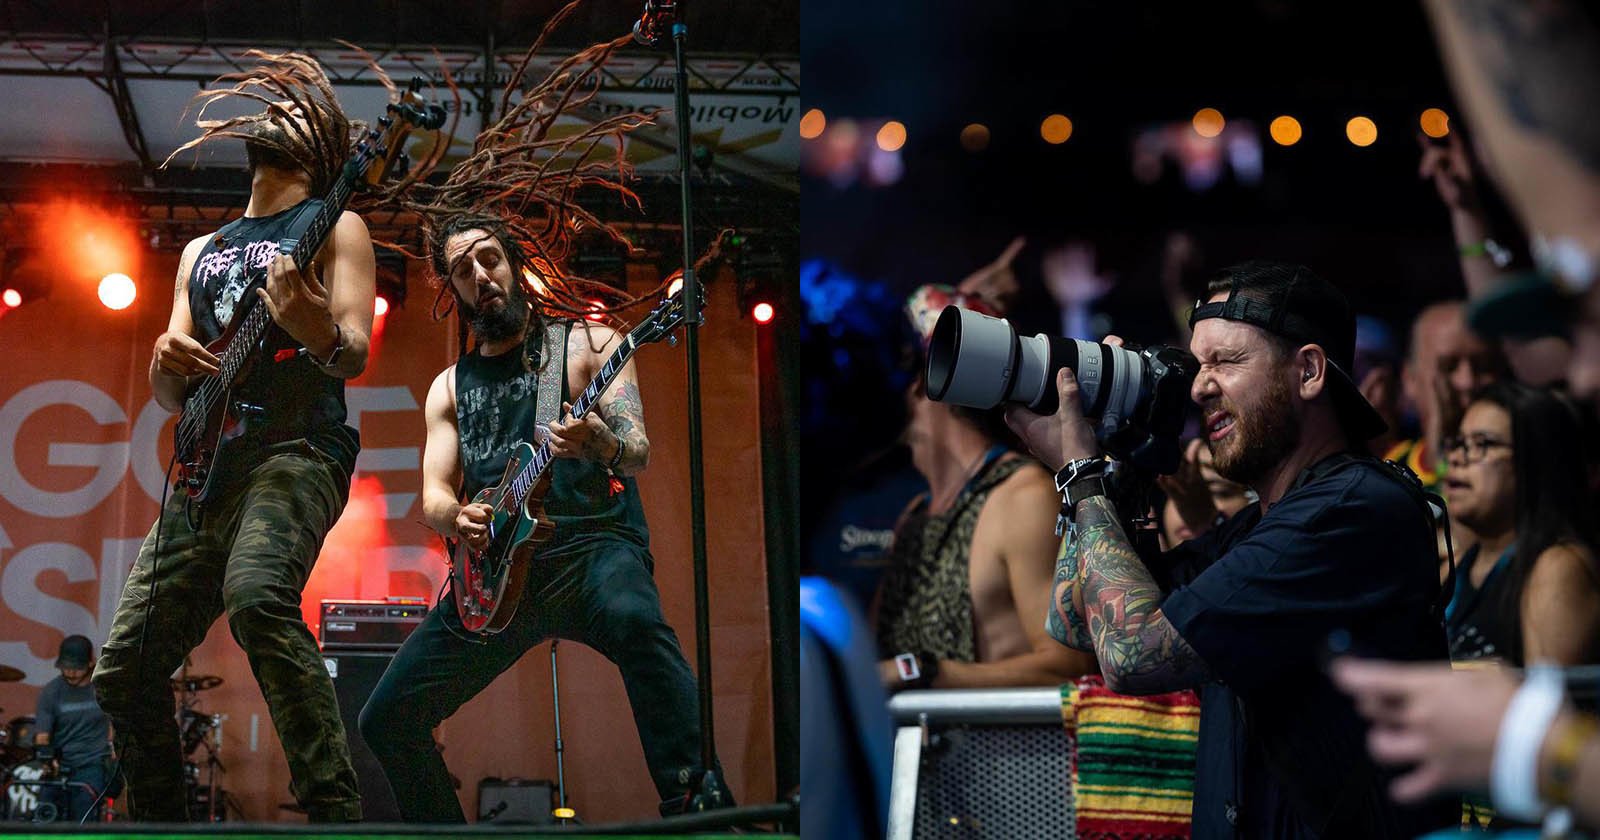 Concert Photography Etiquette: Photo Pit Tips for Music Photographers